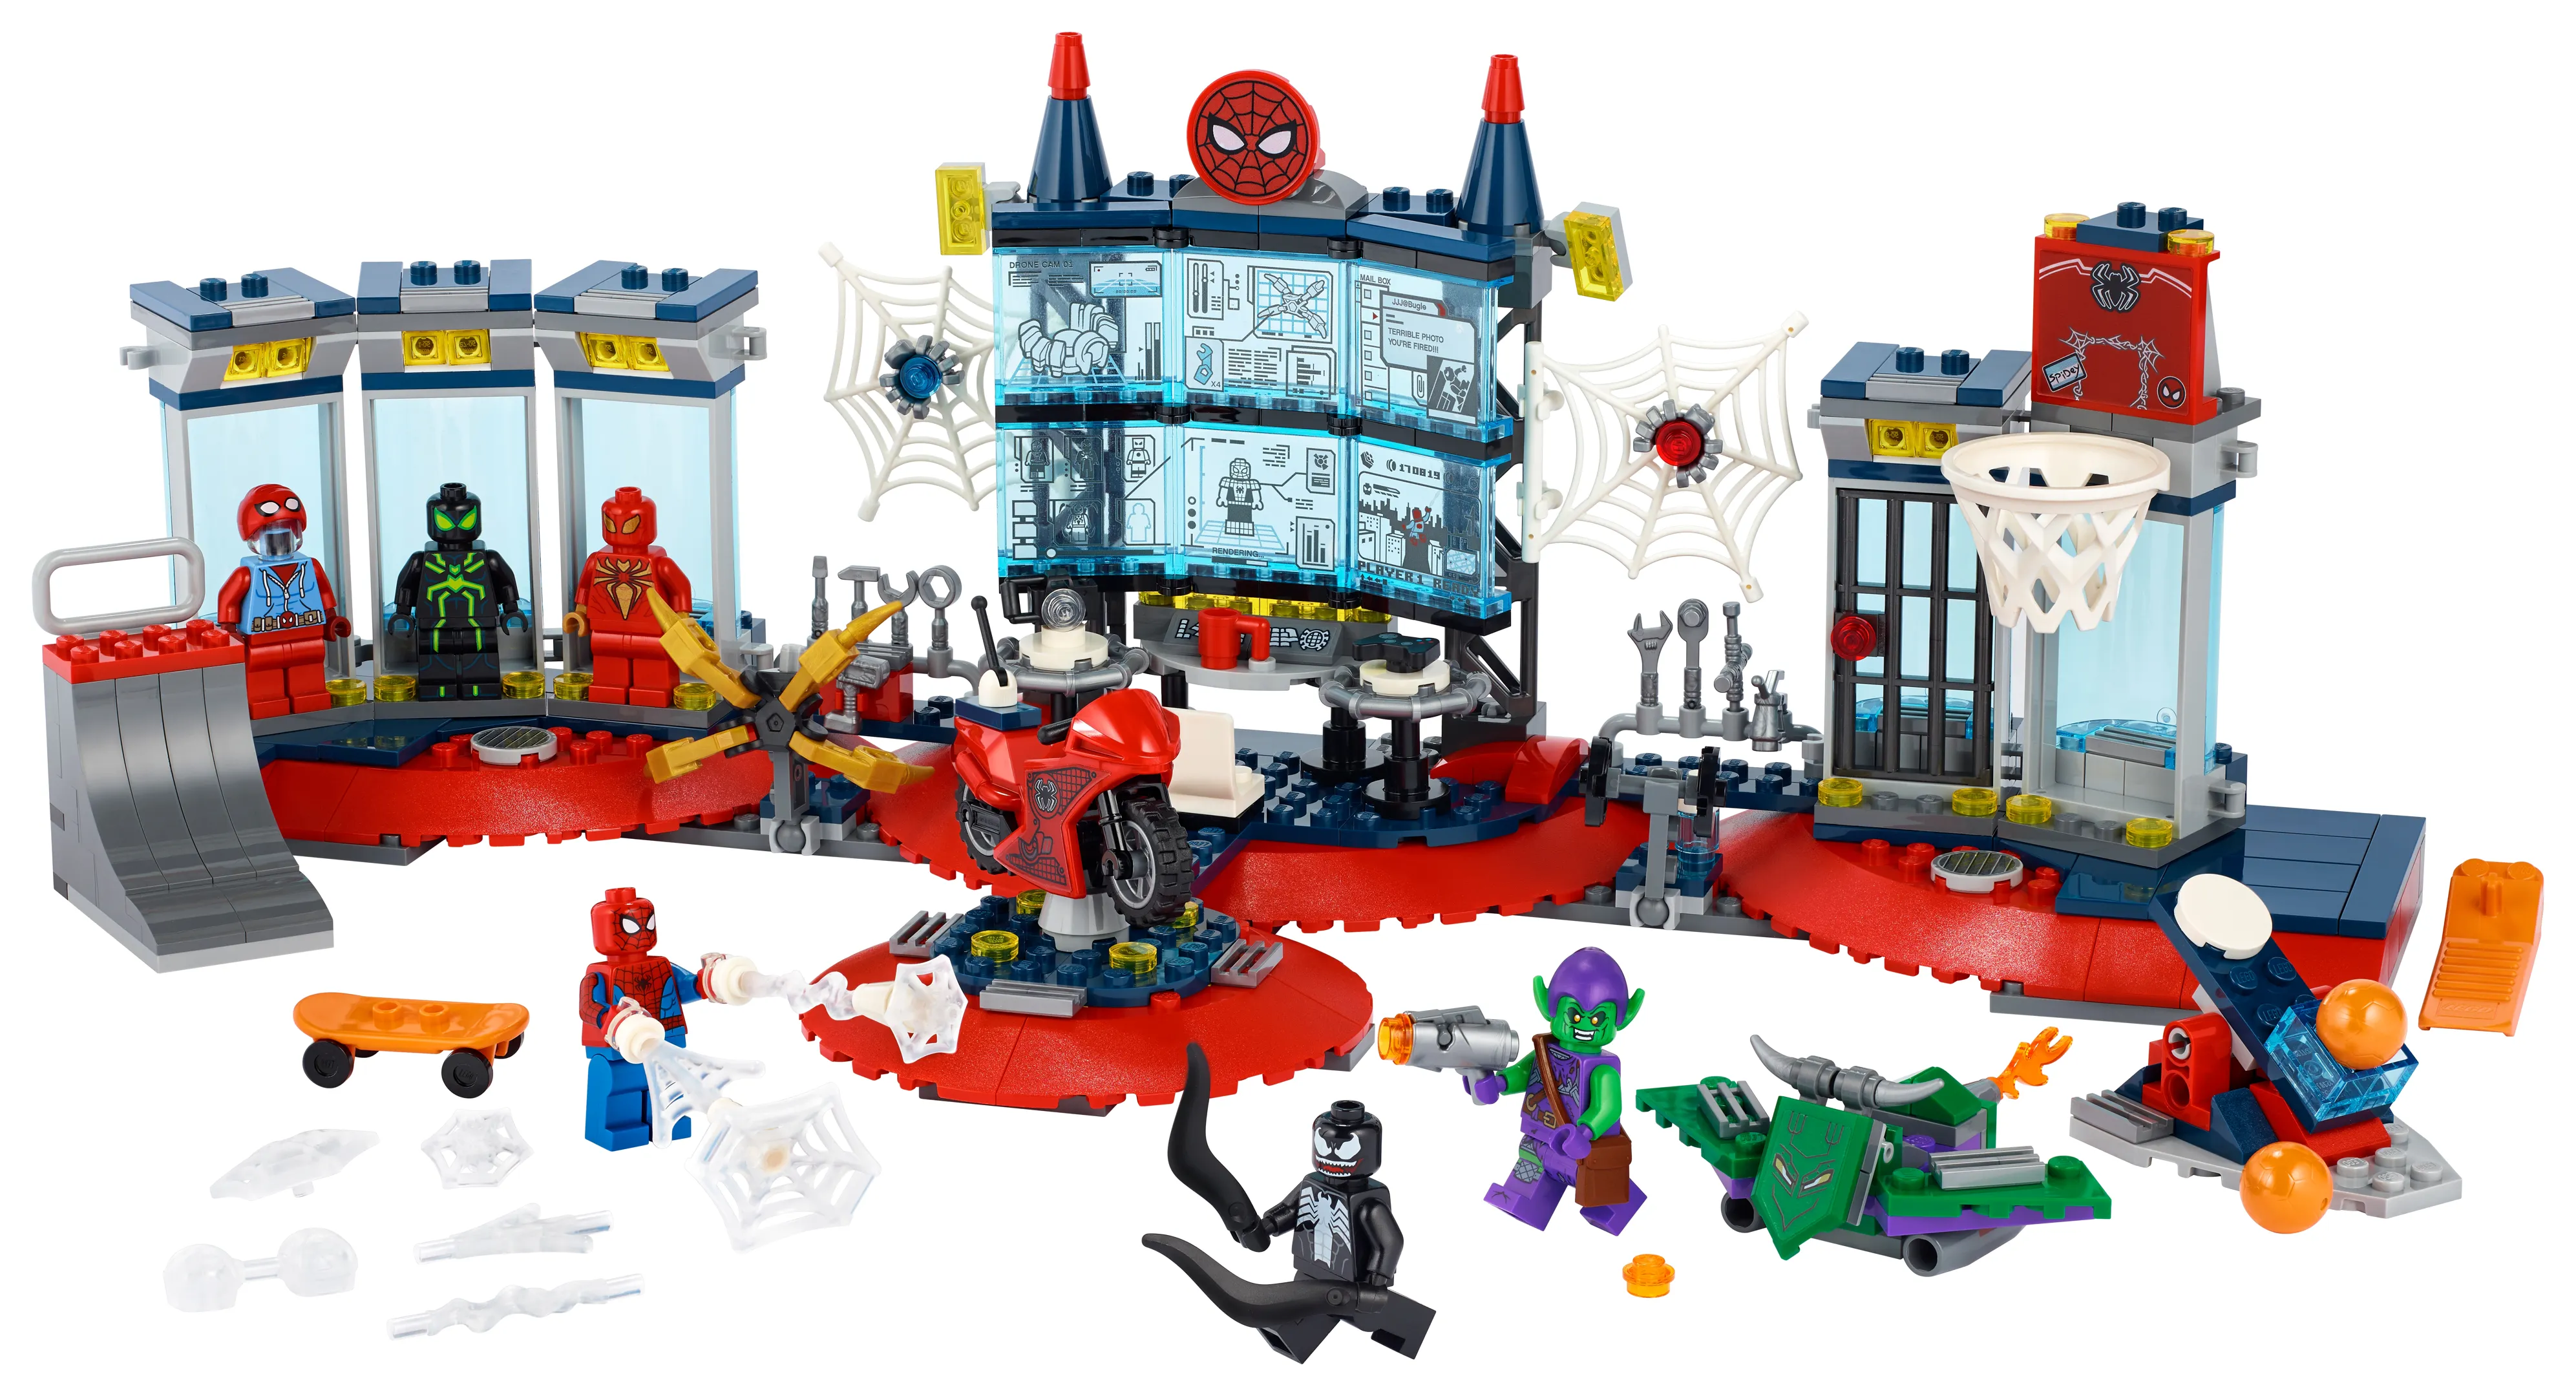 Spider-Man Attack on the Spider Lair Gallery